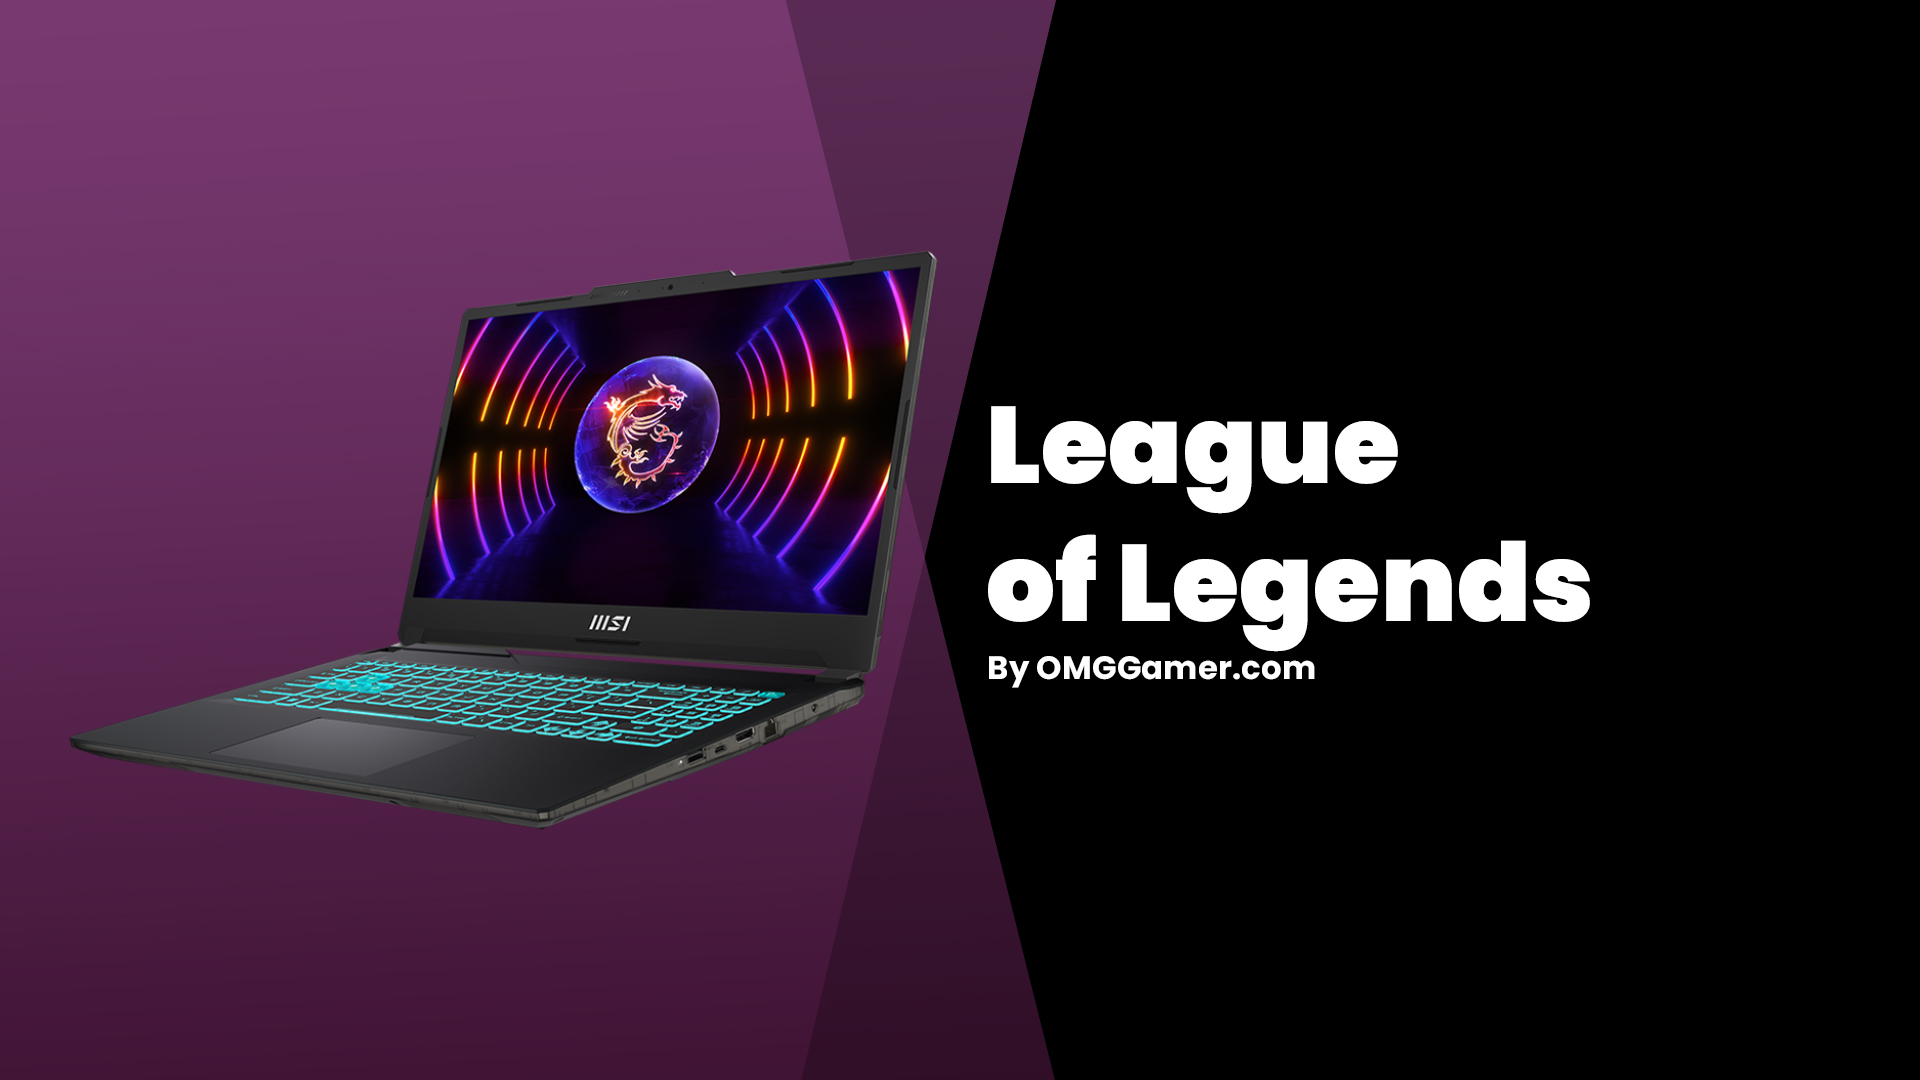 MSI Cyborg 15 Gaming Performance in League of Legends